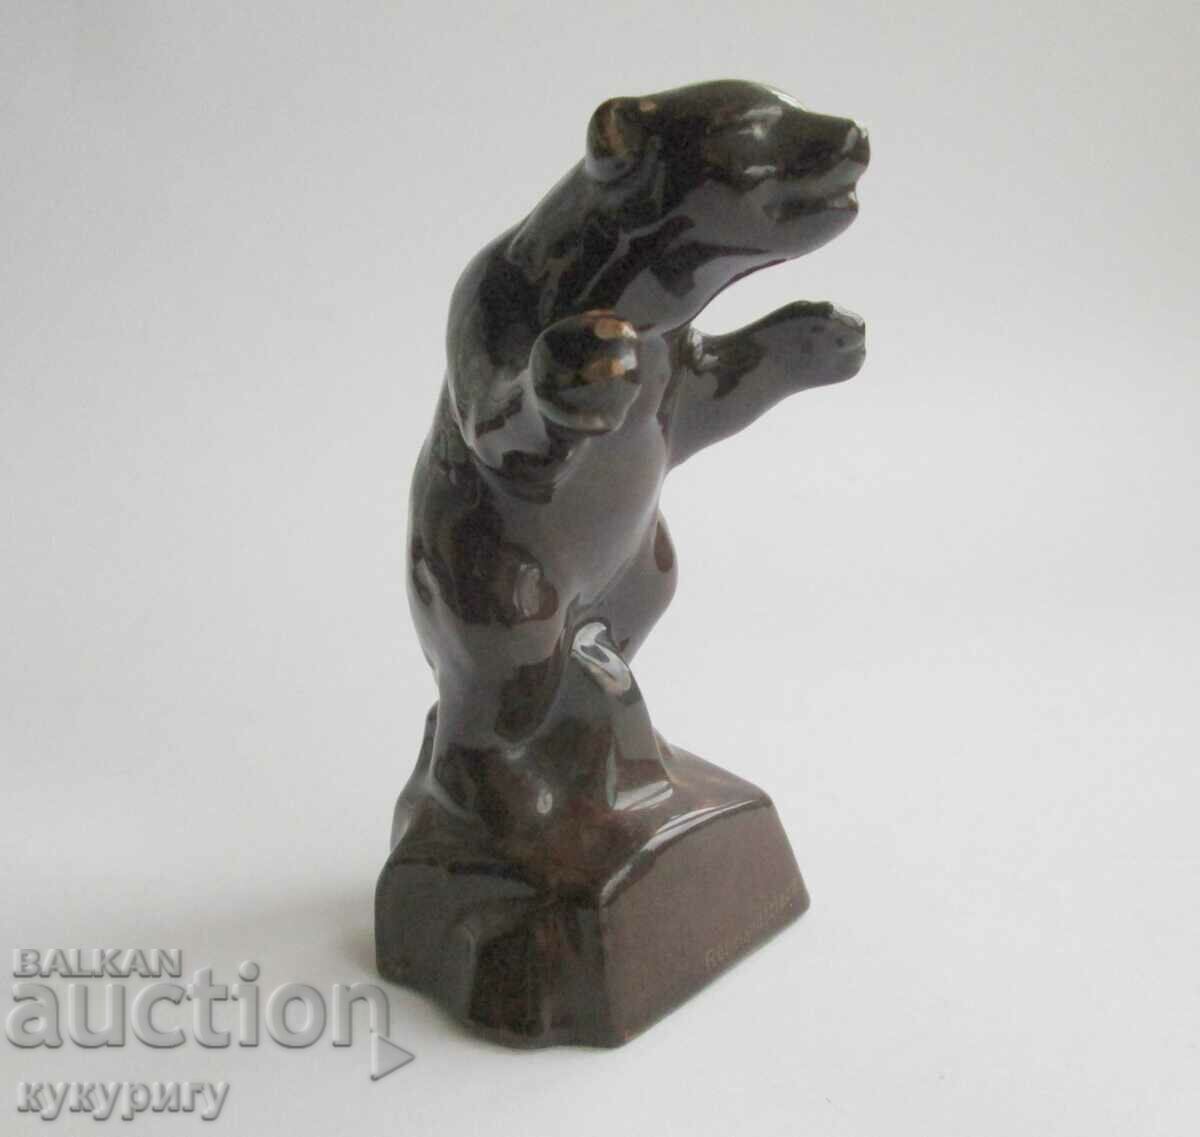 Old ceramic statuette figure angry bear Germany